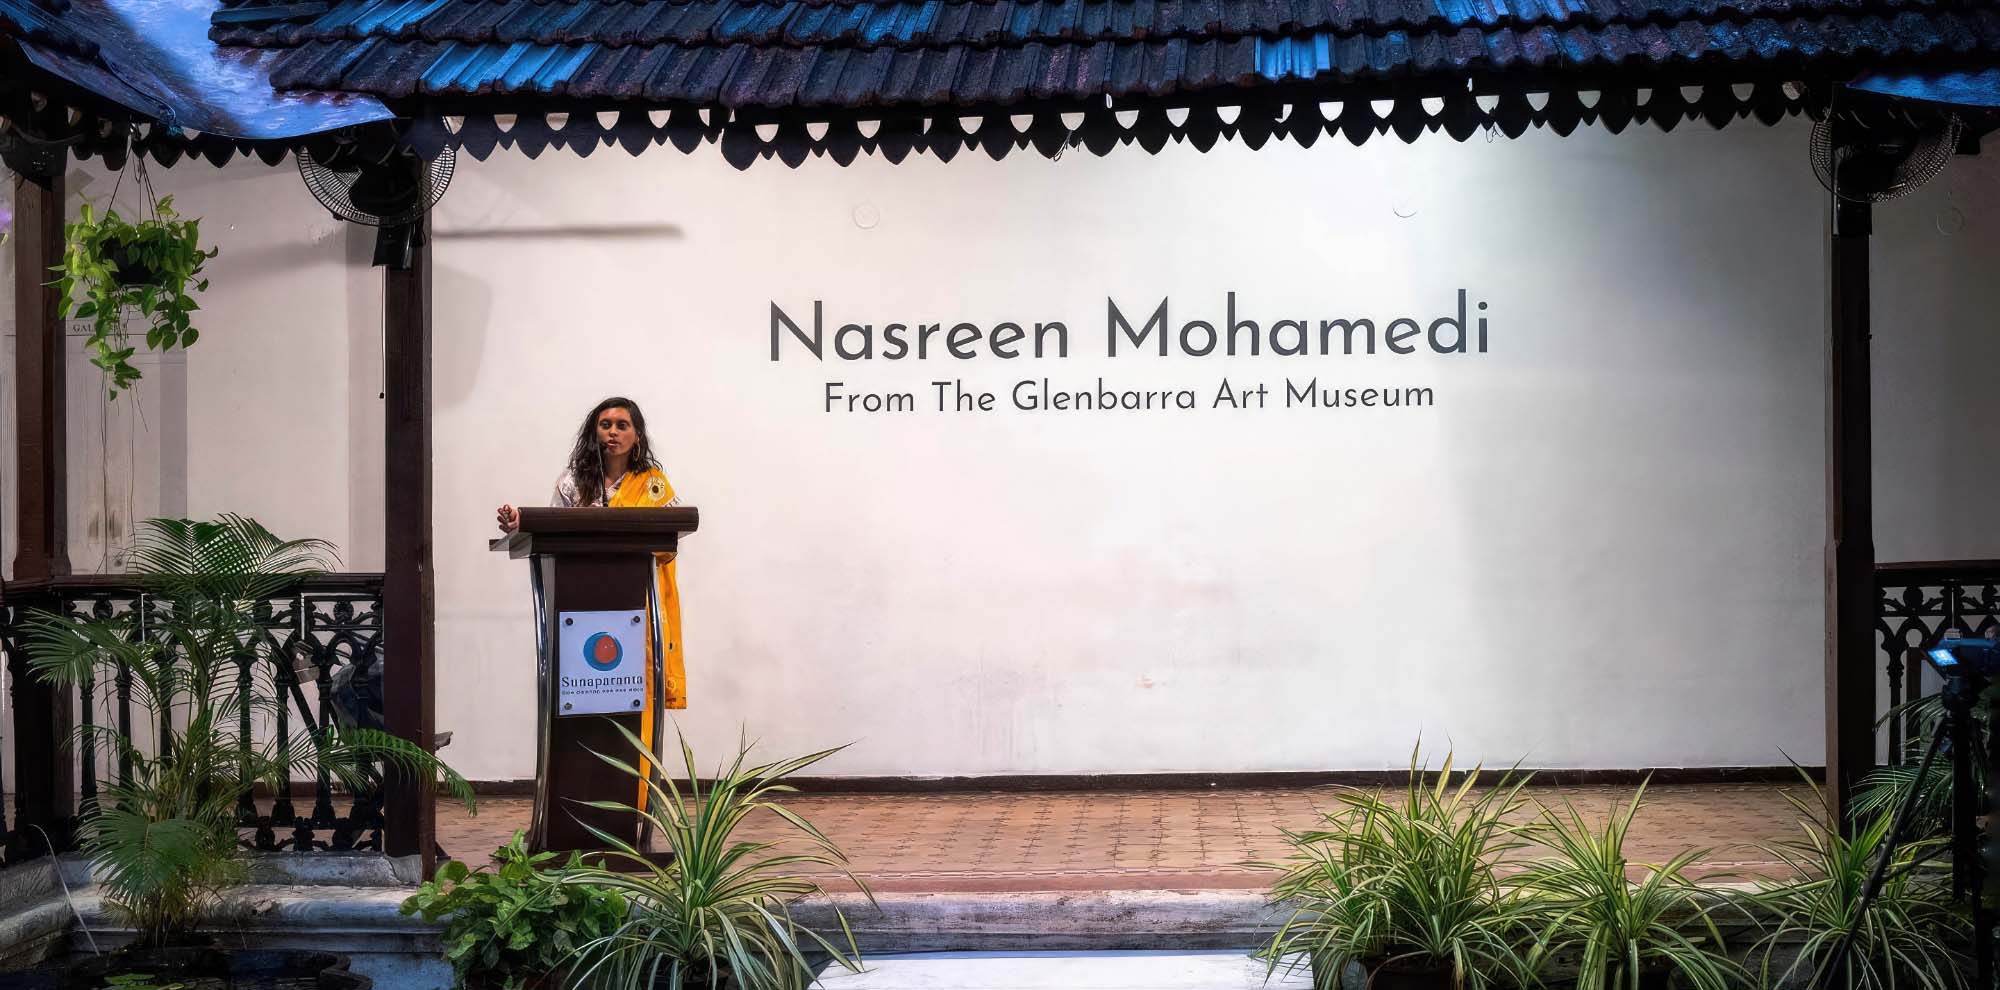 A woman gives a speech on a podium in an open corridor with the English text ‘Nasreen Mohemadi: From the Glenbarra Art Museum’ on the wall behind her.